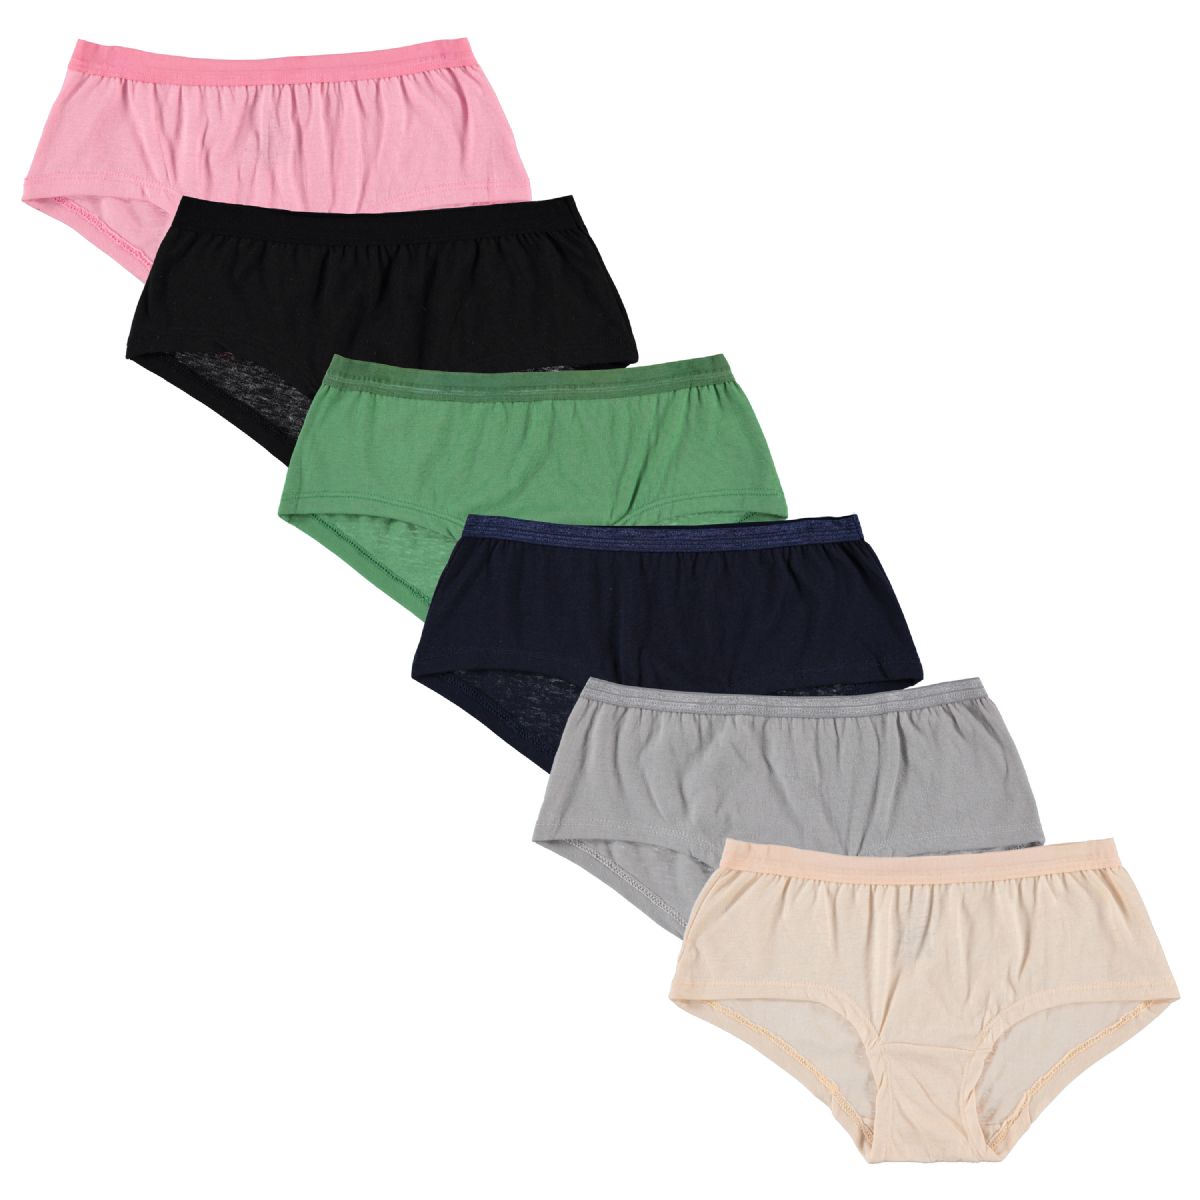 6 Wholesale Yacht & Smith Womens Cotton Blend Underwear In Assorted Colors, Size Large